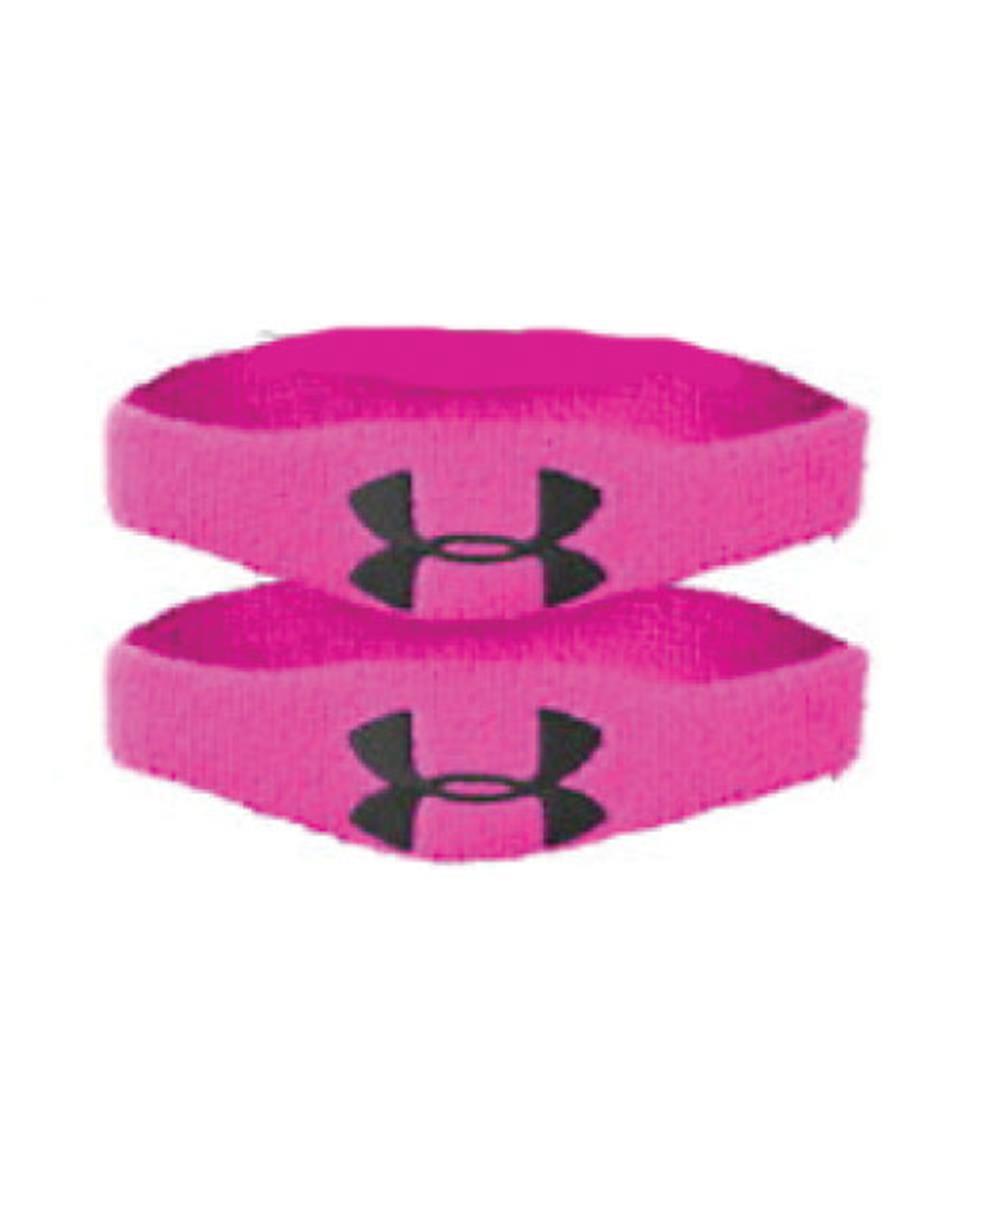 Used Under Armor Reversible Wrist Band – cssportinggoods